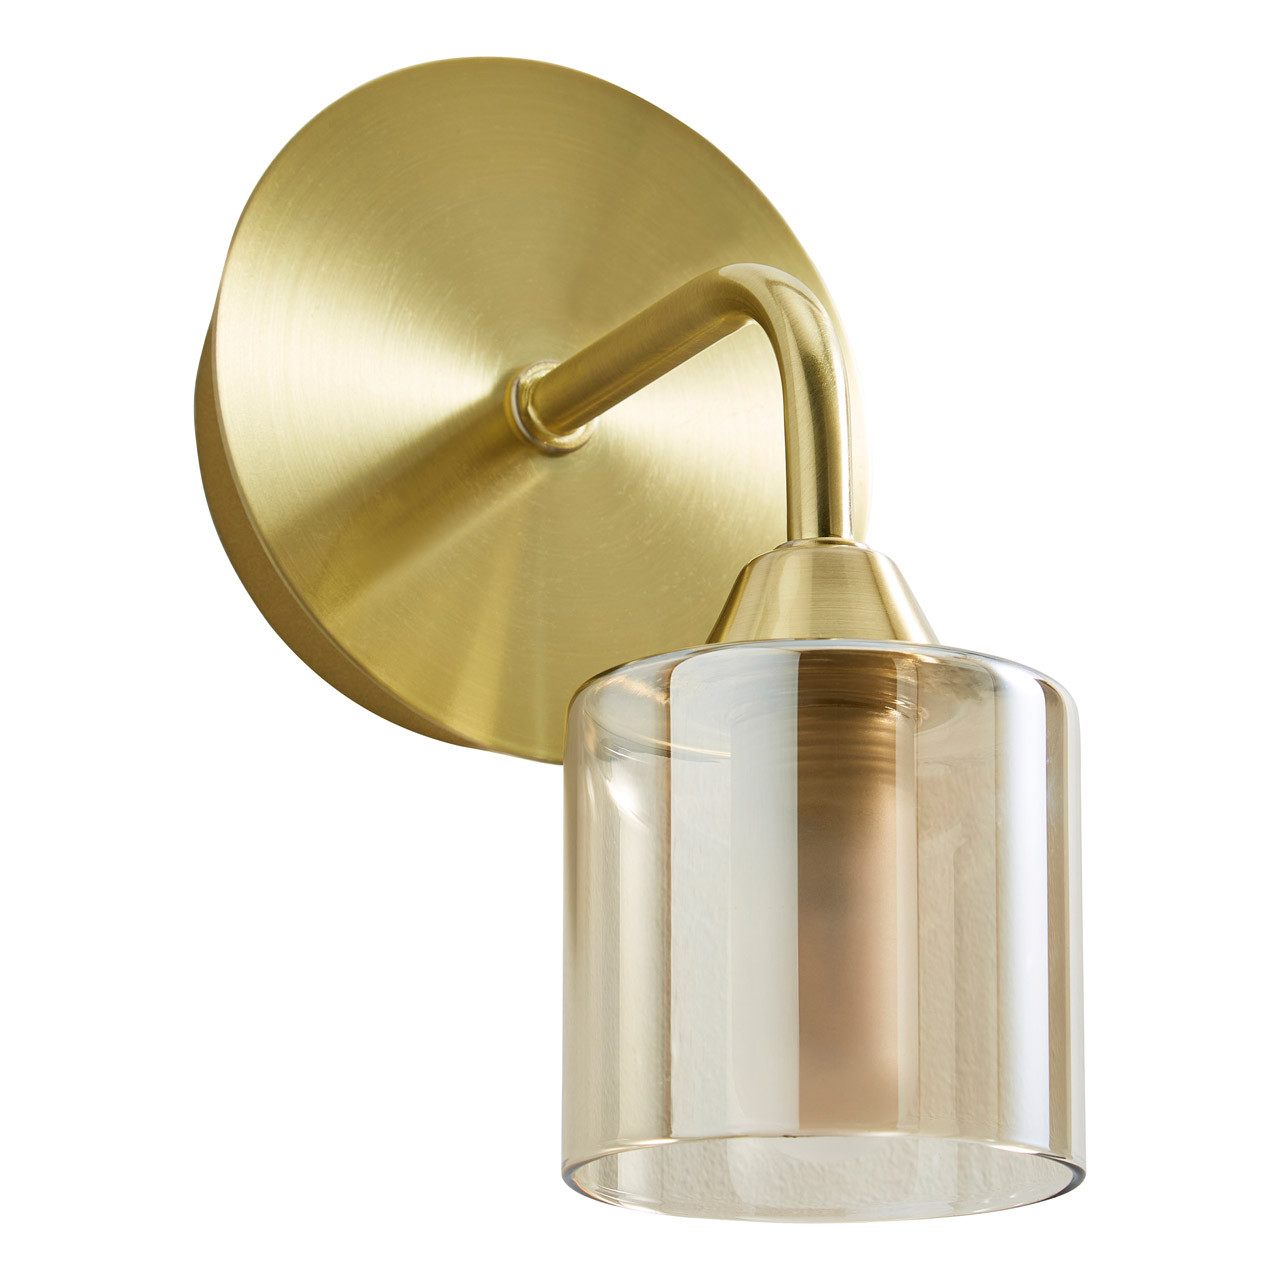 Photos - Chandelier / Lamp SPA Patras Single Wall Light Champagne Glass and Satin Brass -35811-CHA 